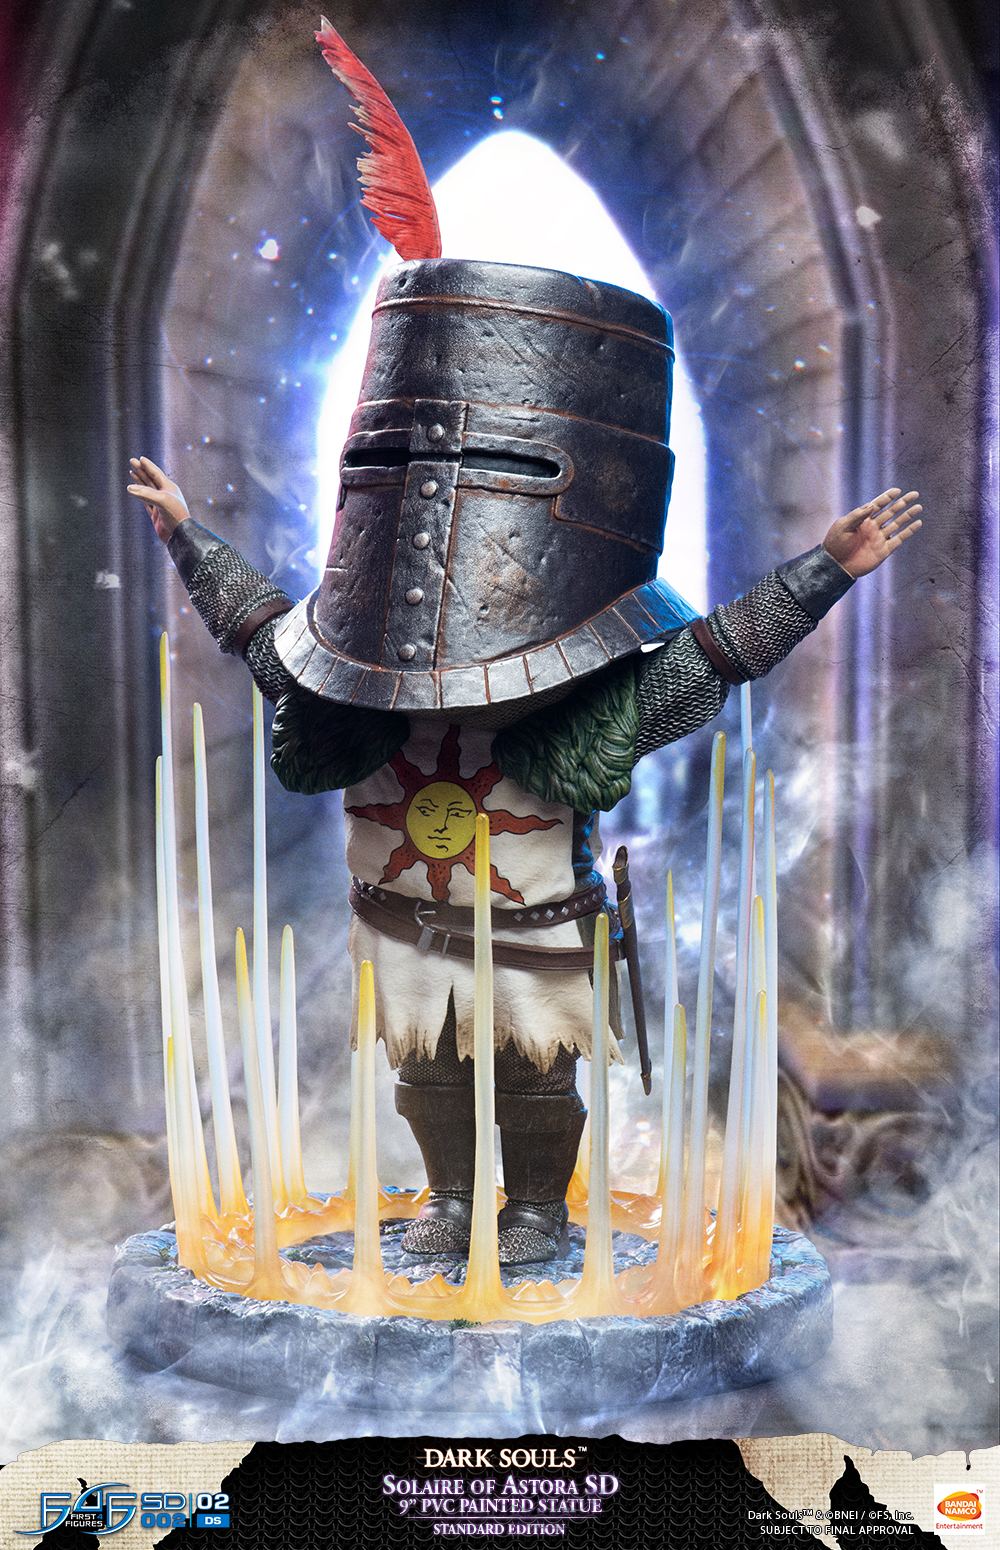 DARK SOULS STATUE: SOLAIRE OF ASTORA SD STANDARD EDITION First4Figures